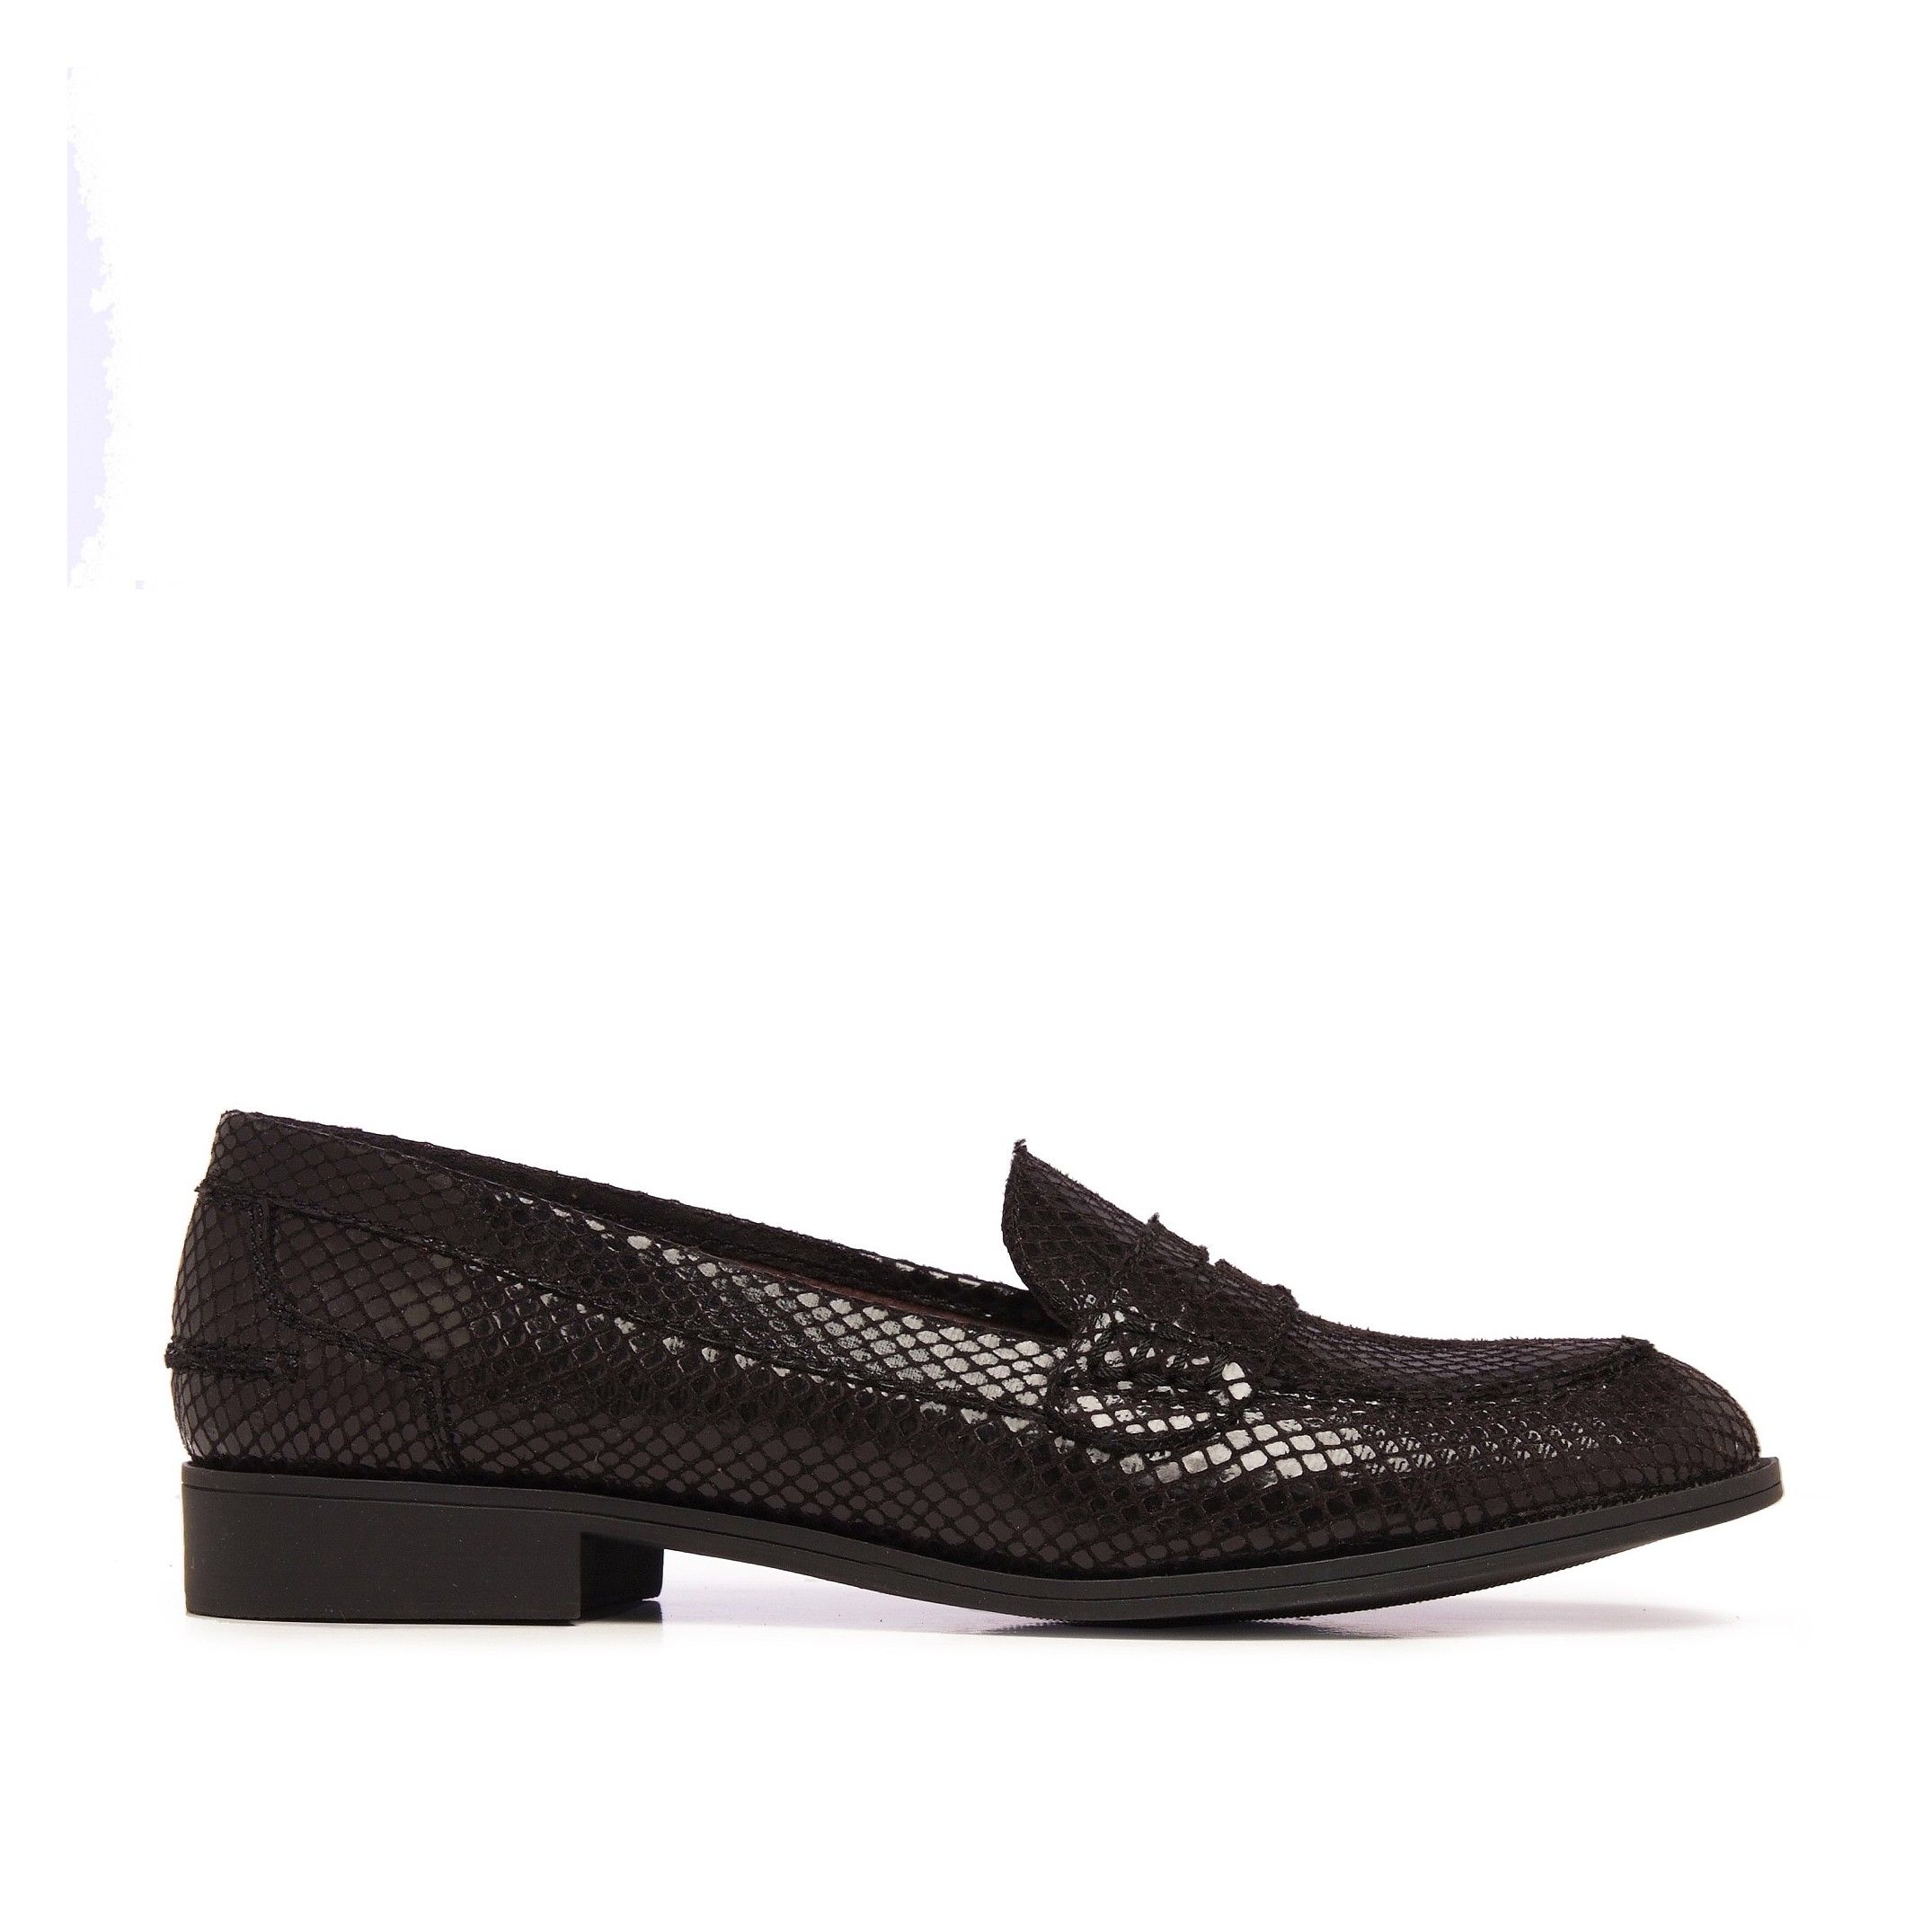 Leather moccasin with mask for women. Snake style. Upper, inner and insole made of leather. Made in Spain